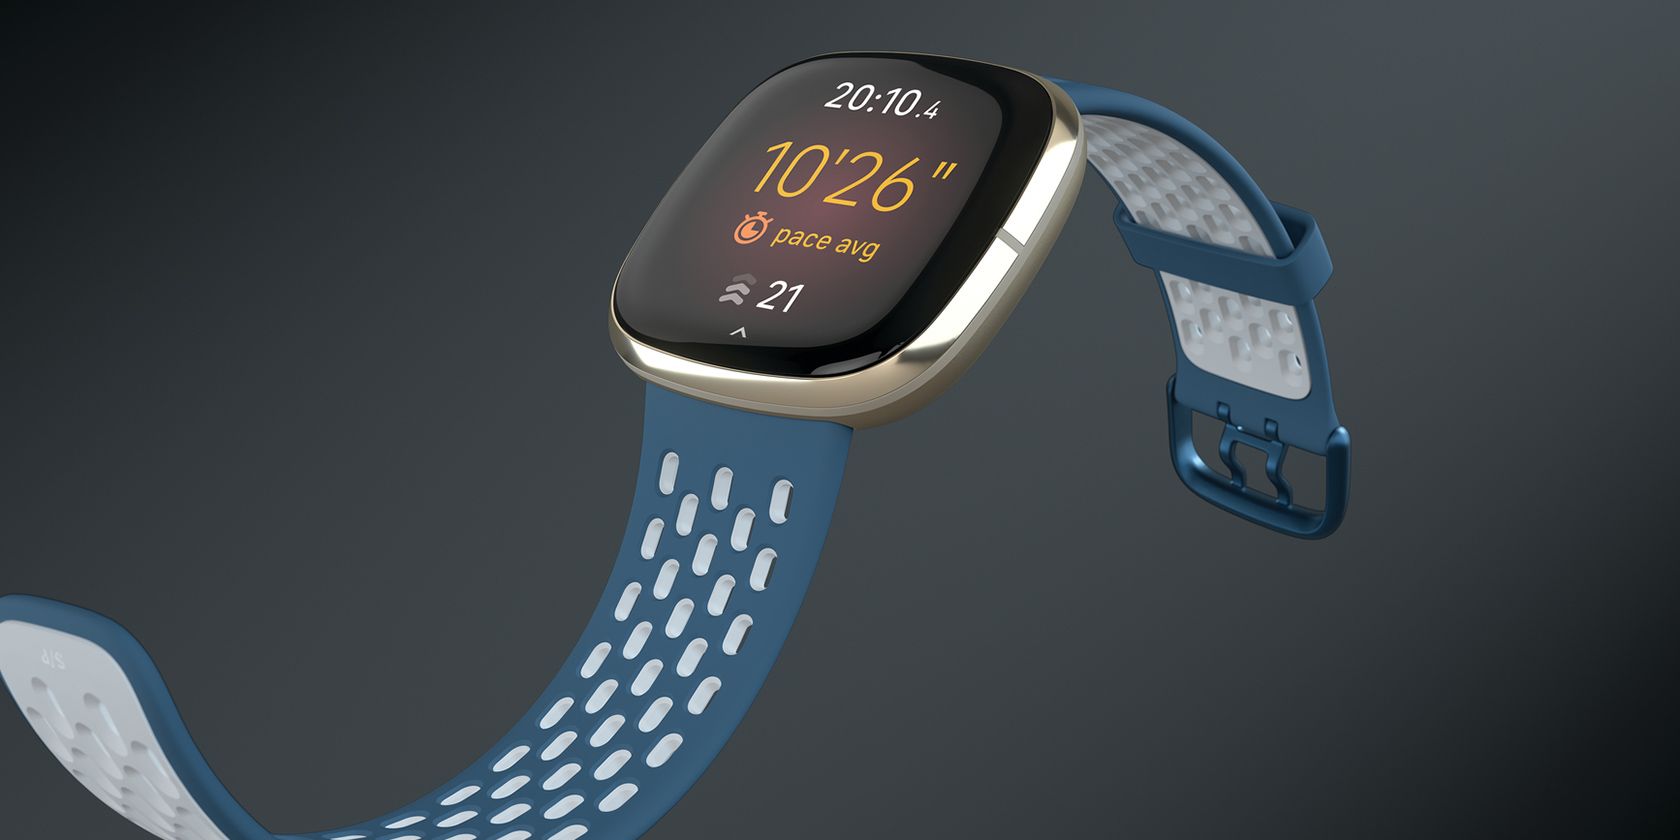 fitbit smartwatches